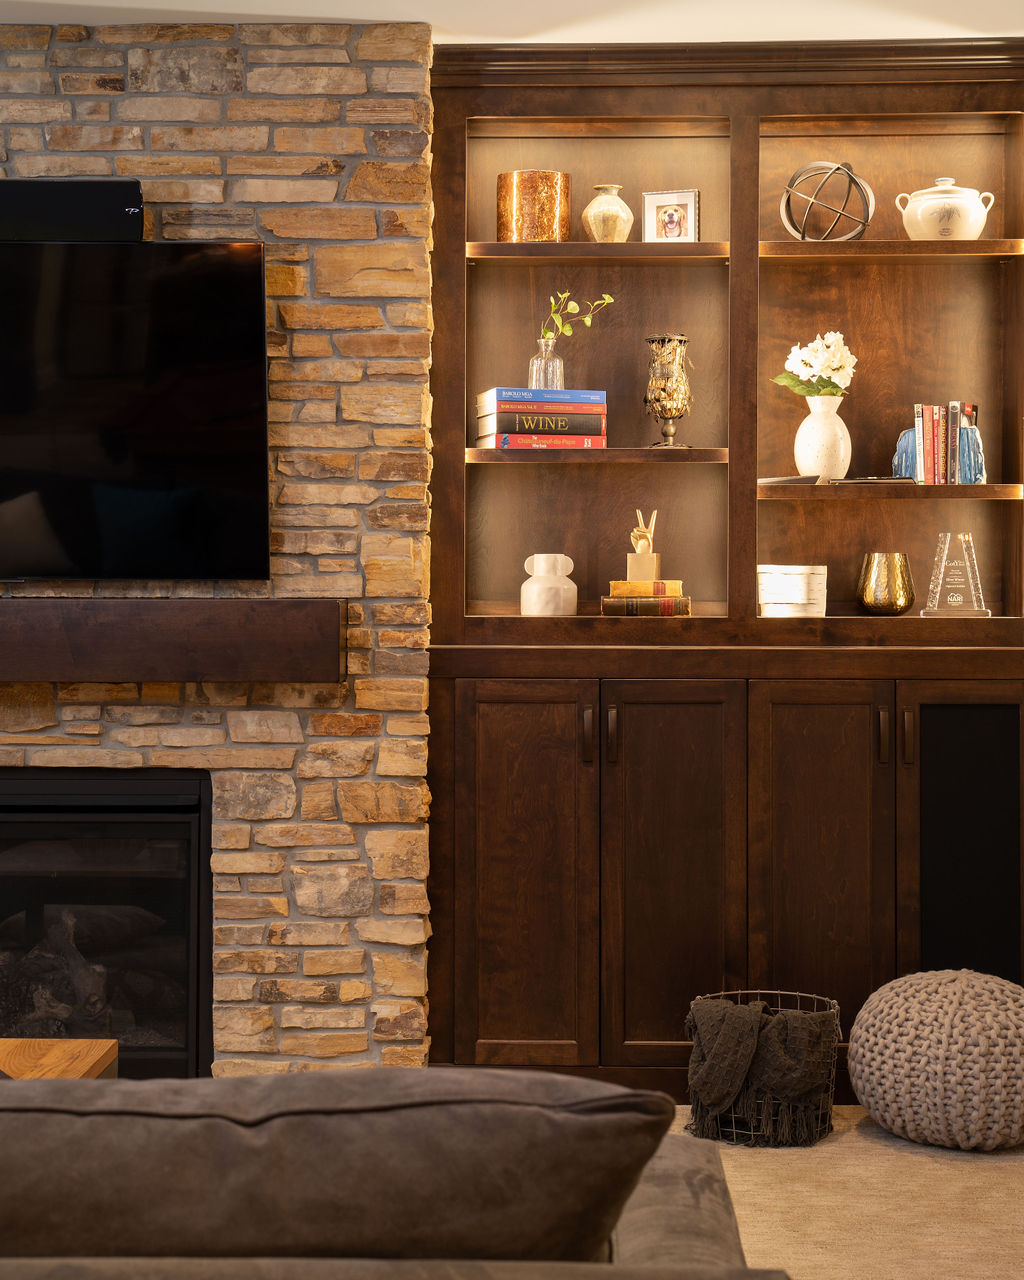 A stone fireplace in an Edina remodel living room.